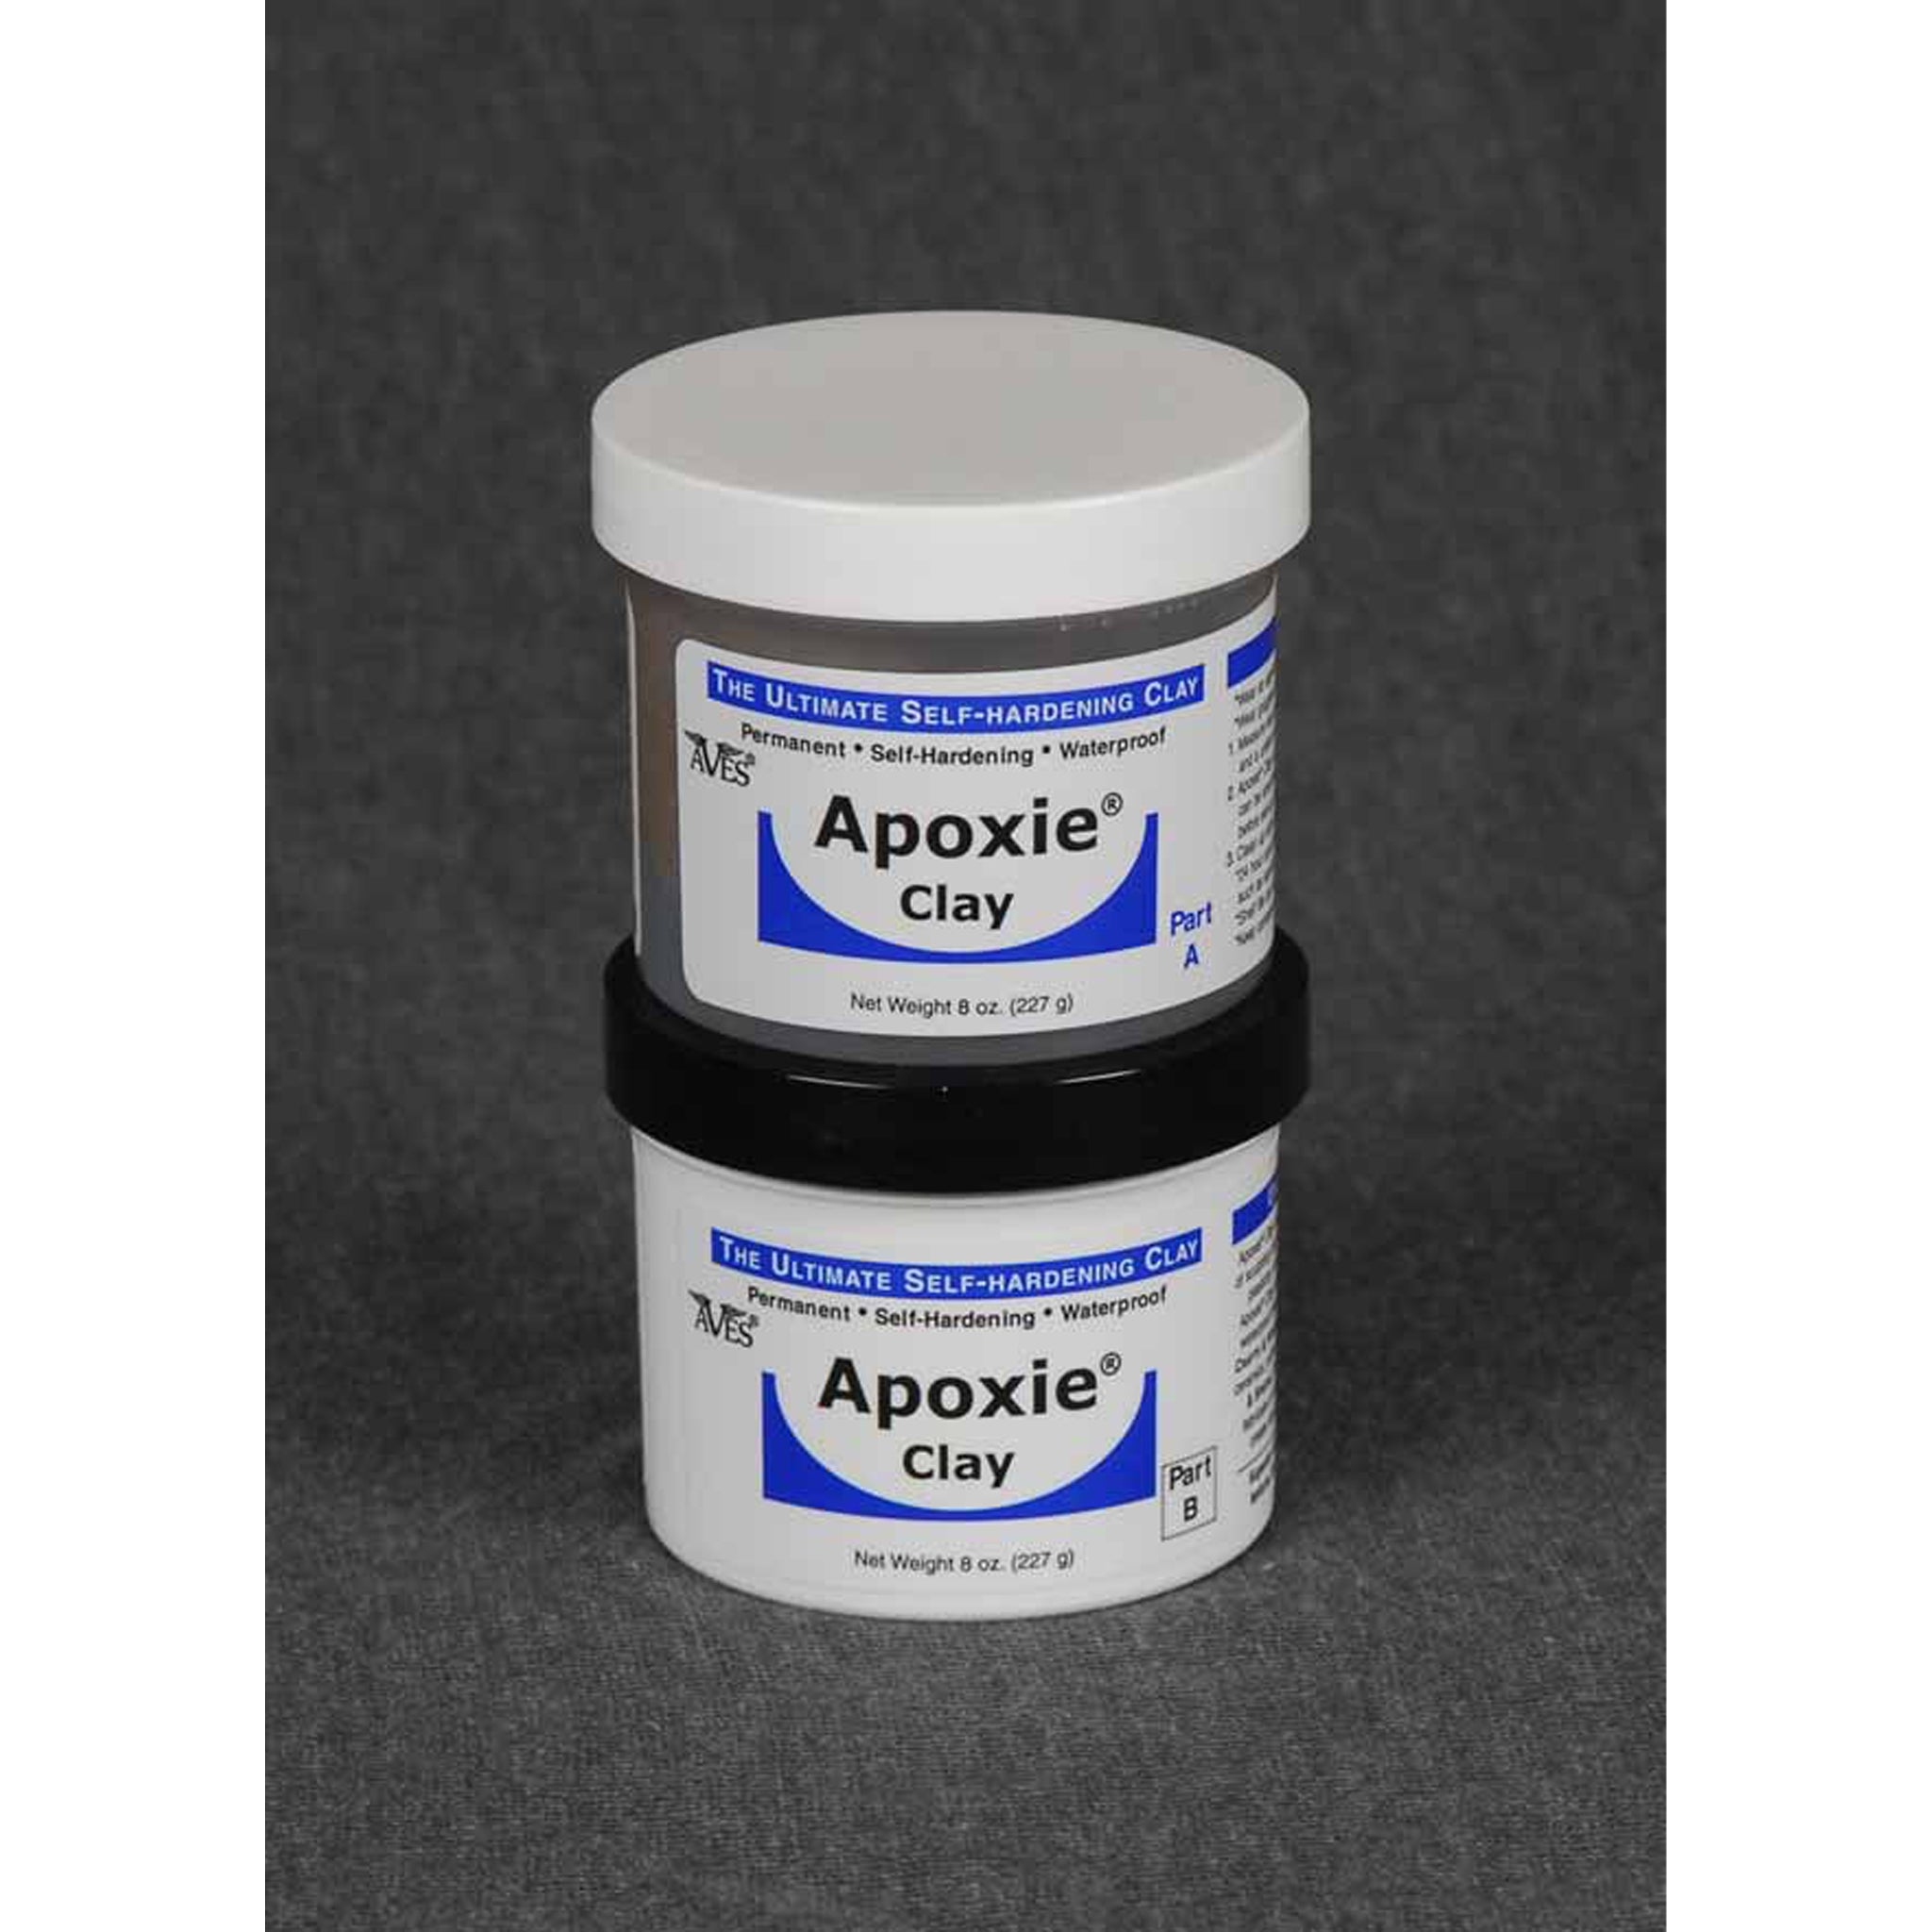 Keep Coming Back to Apoxie Sculpt - Aves: Maker of Fine Clays and Maches, Apoxie  Sculpt, Epoxy Putty and More